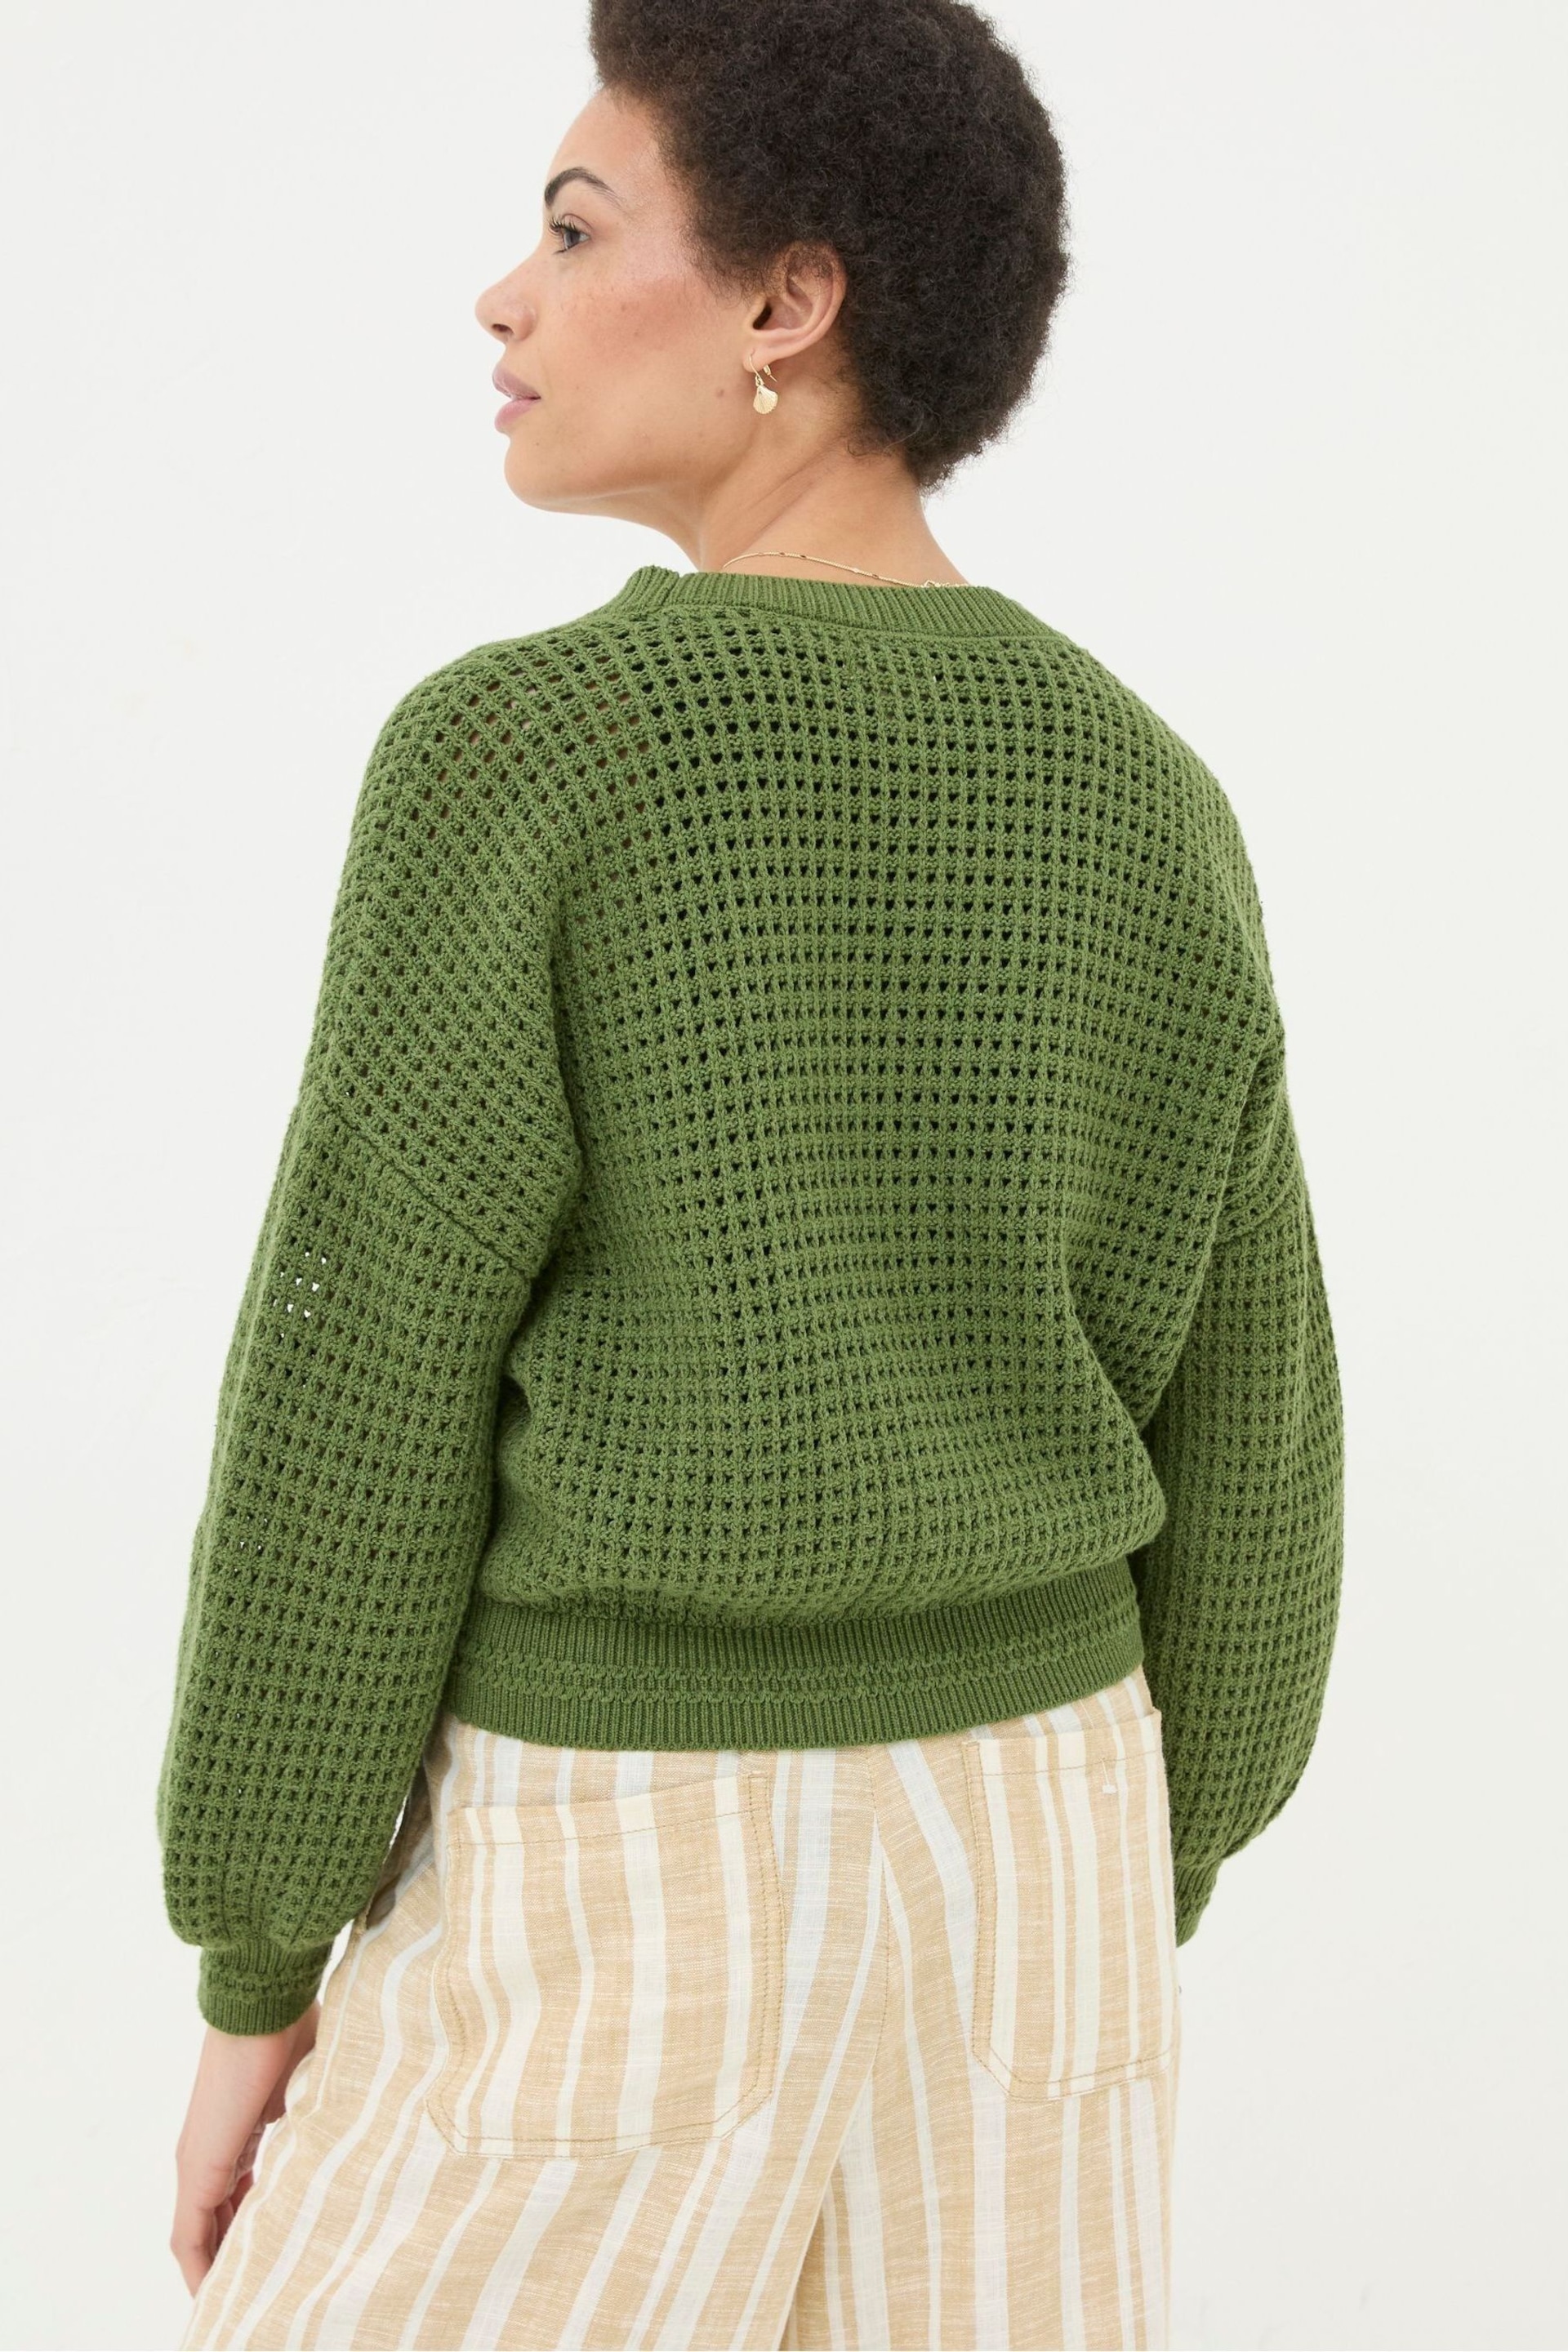 FatFace Green Annie Button Through Cardigan - Image 2 of 5